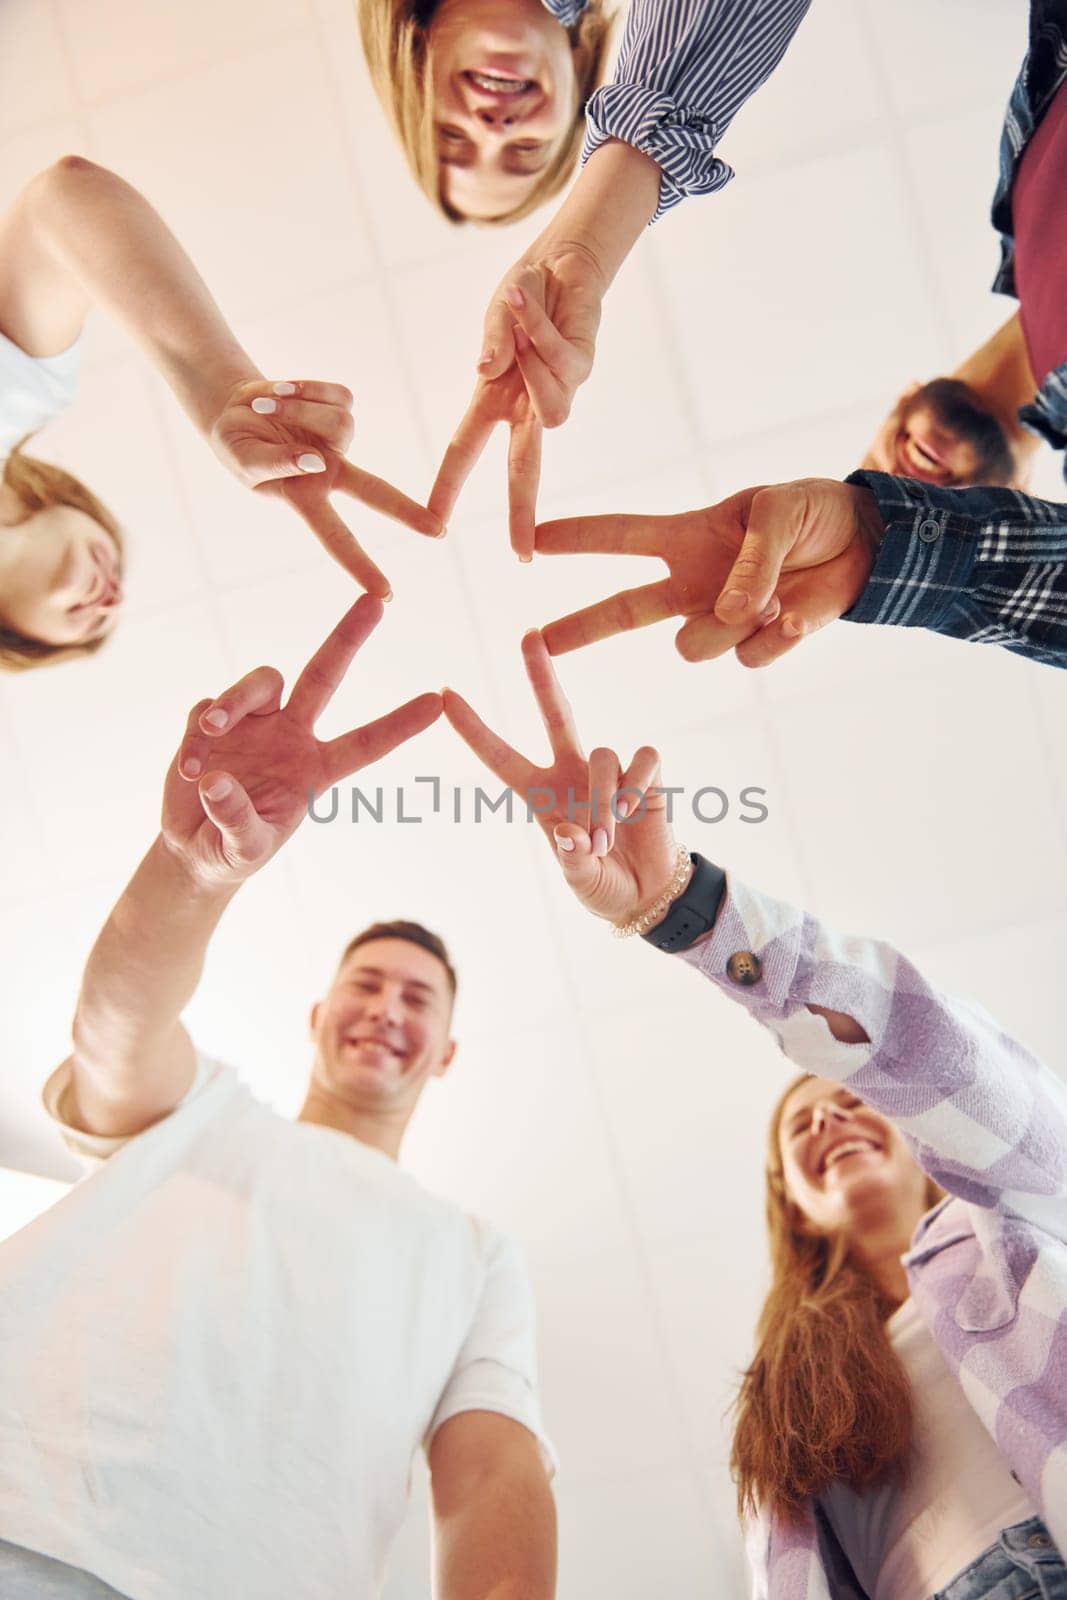 Making gesture by hands. Group of friends standing together by Standret